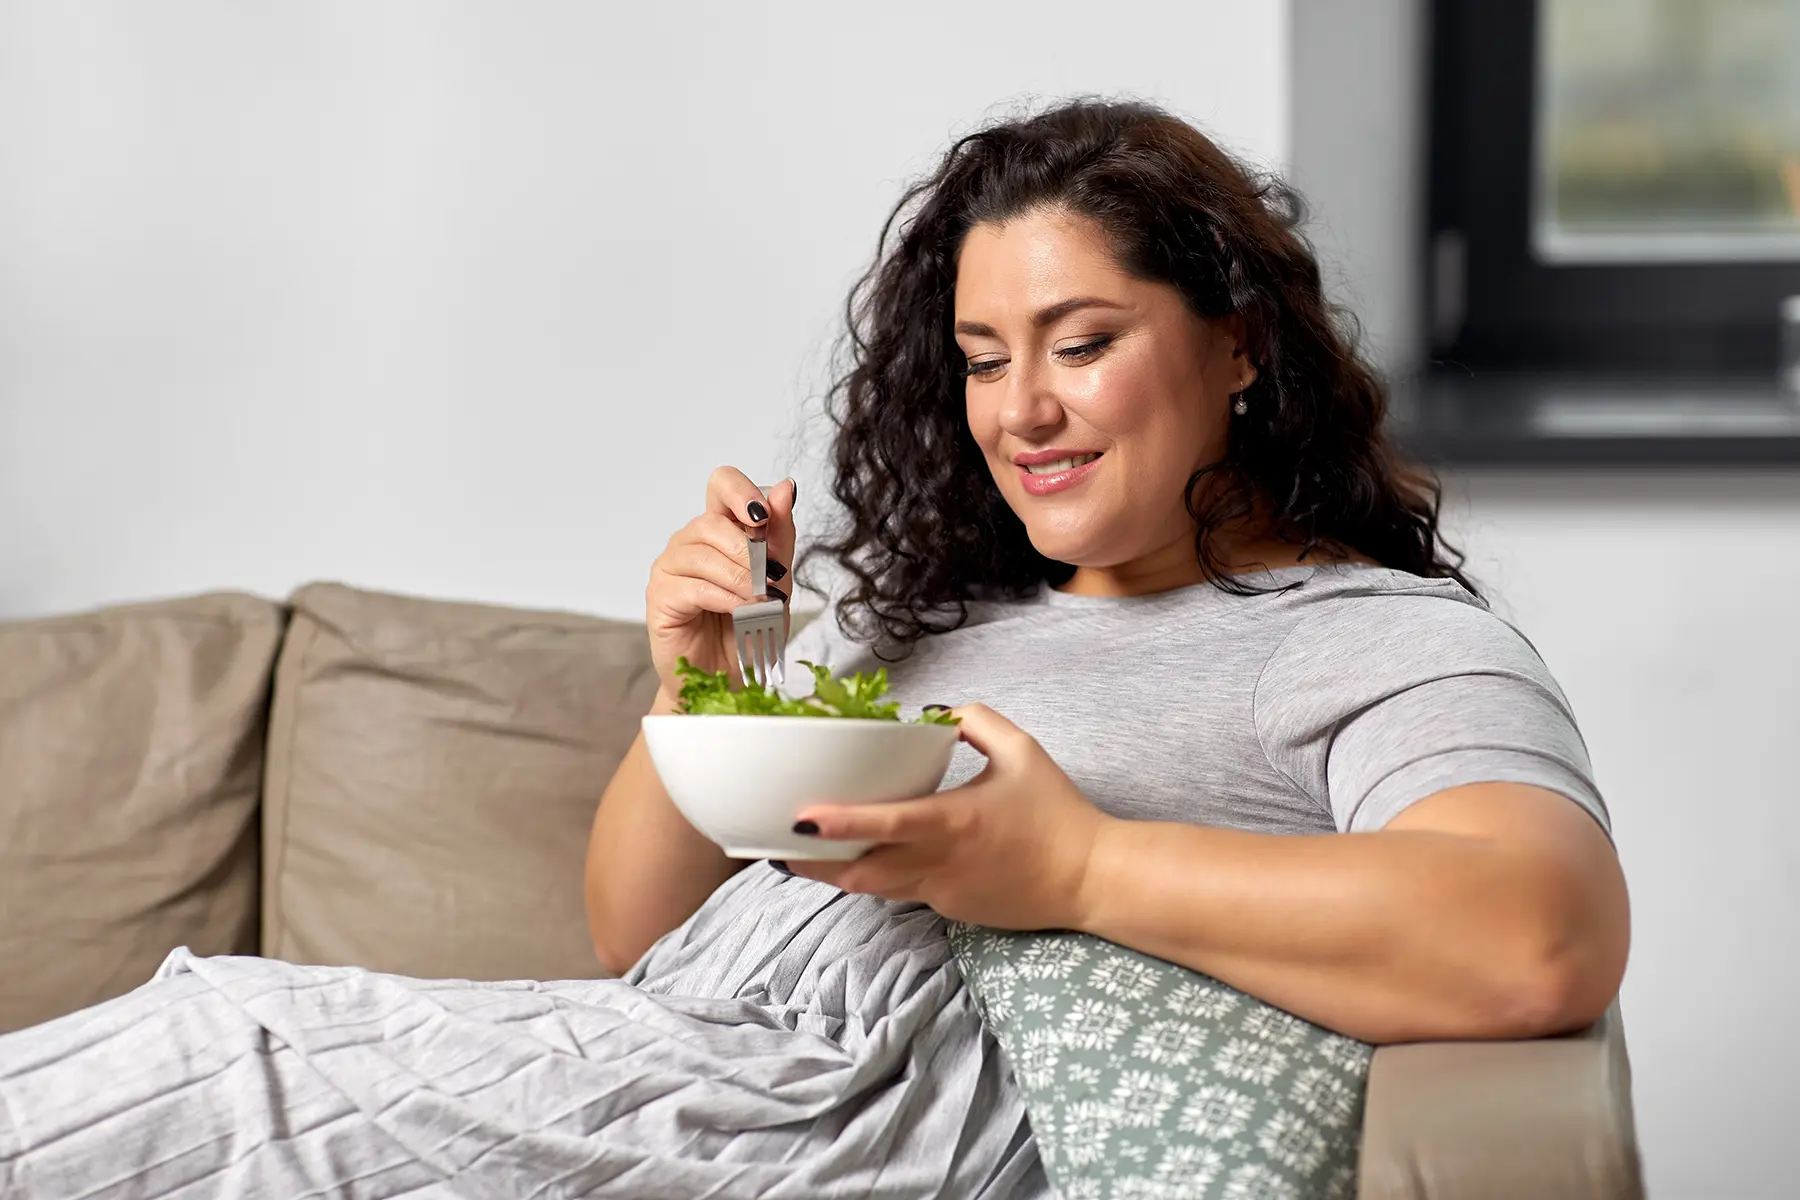 Woman sitting on her couch eating a salad.